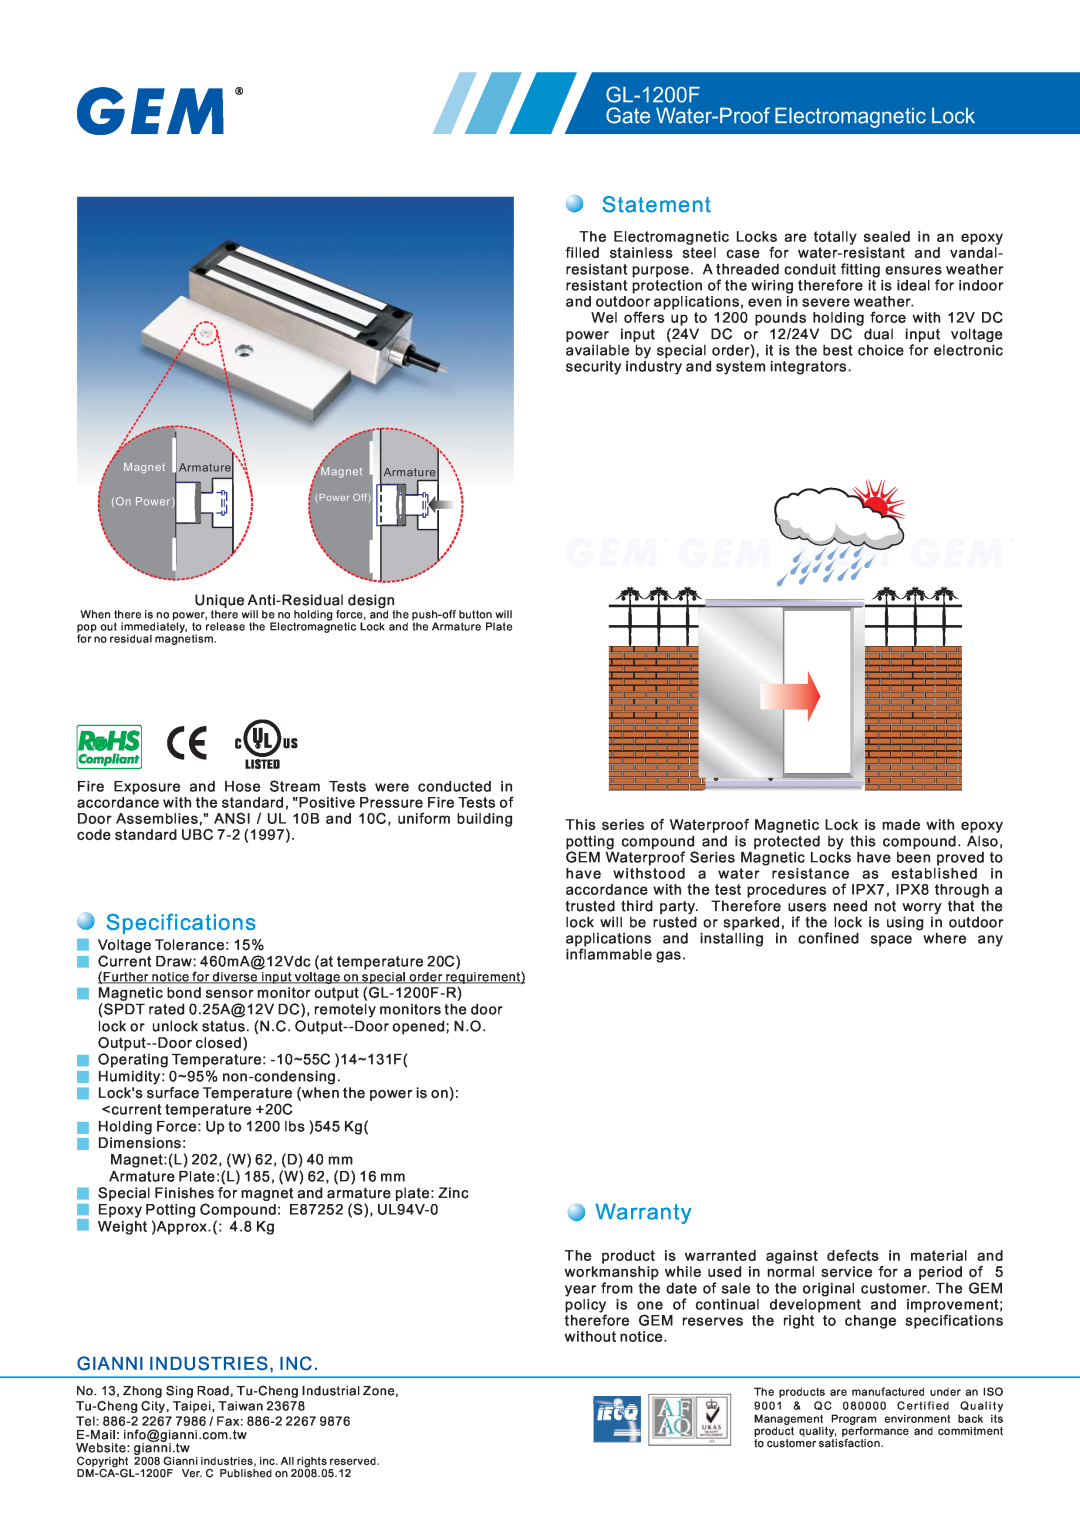 Gianni Industries specifications GL-1200F Gate Water-Proof Electromagnetic Lock, Gianni Industries, Inc, Statement 